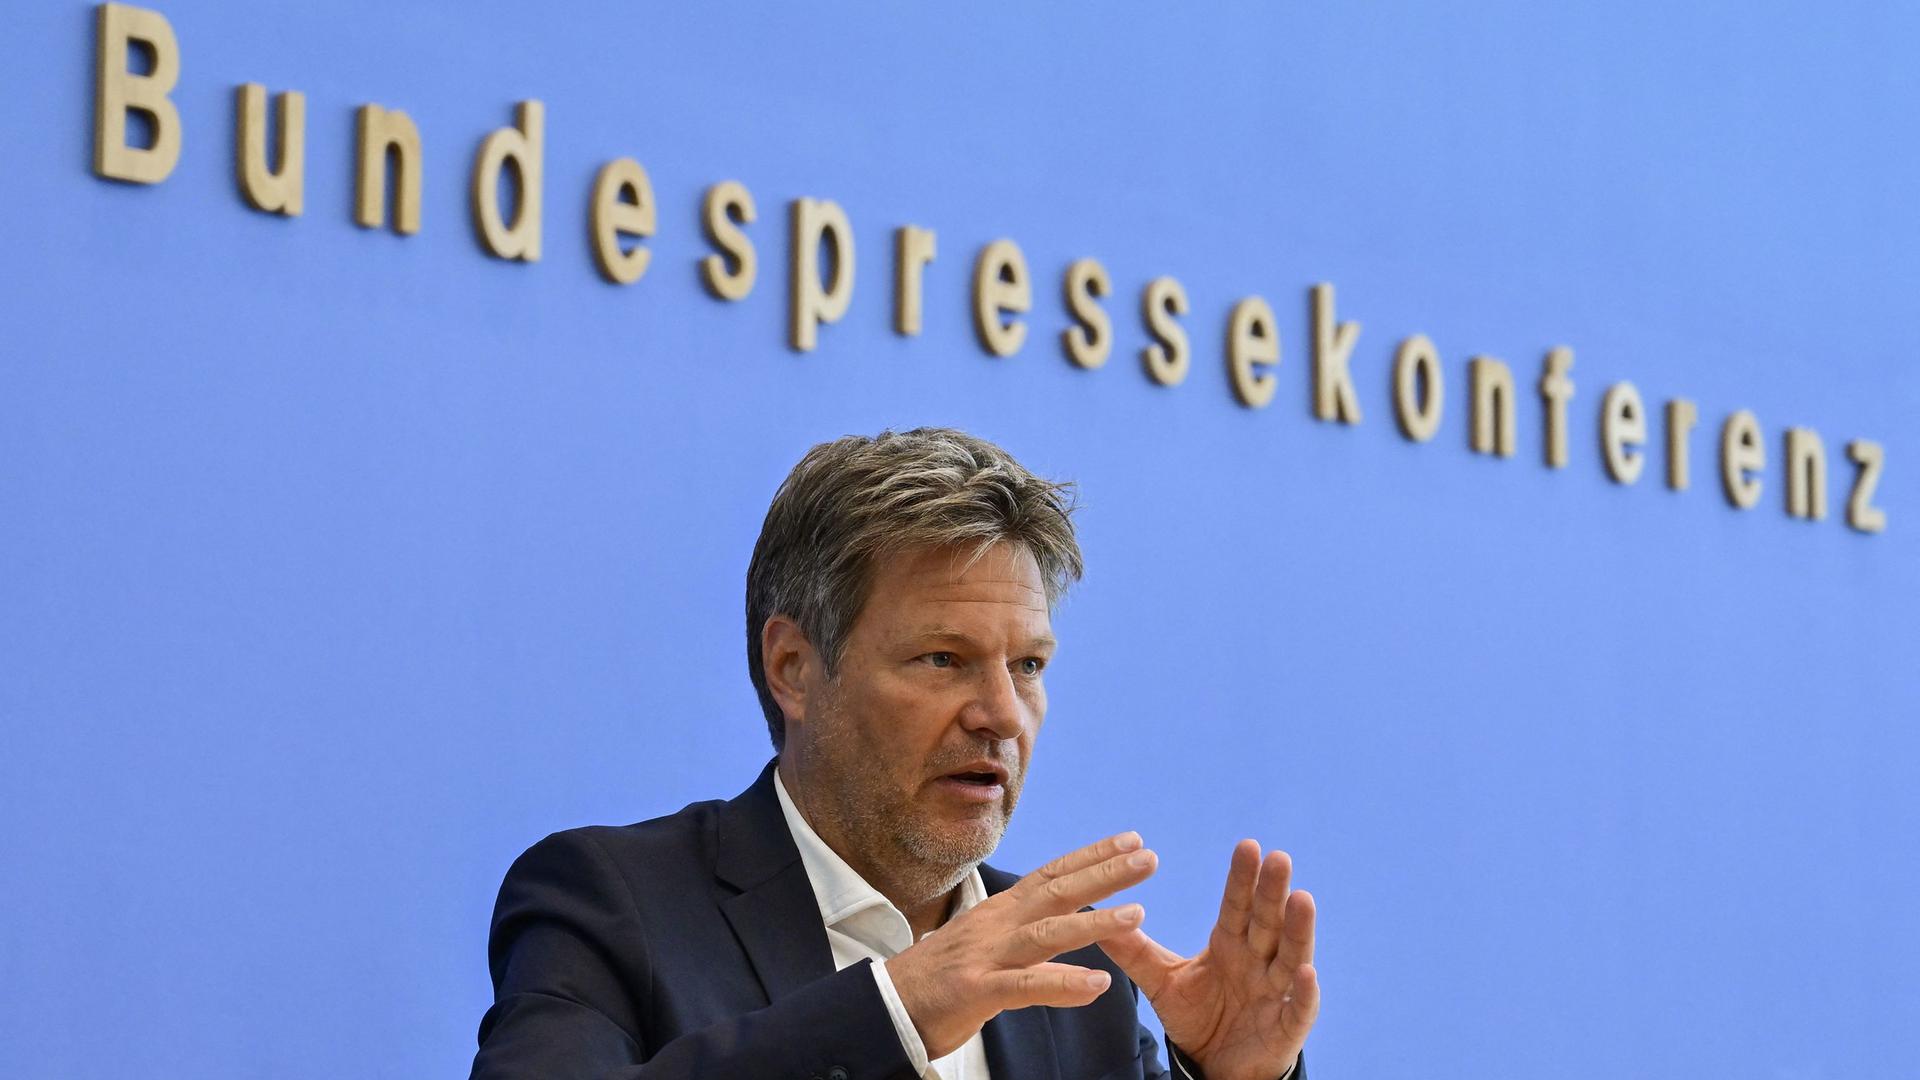 German Minister of Economics and Climate Protection Robert Habeck addresses a press conference on Wednesday